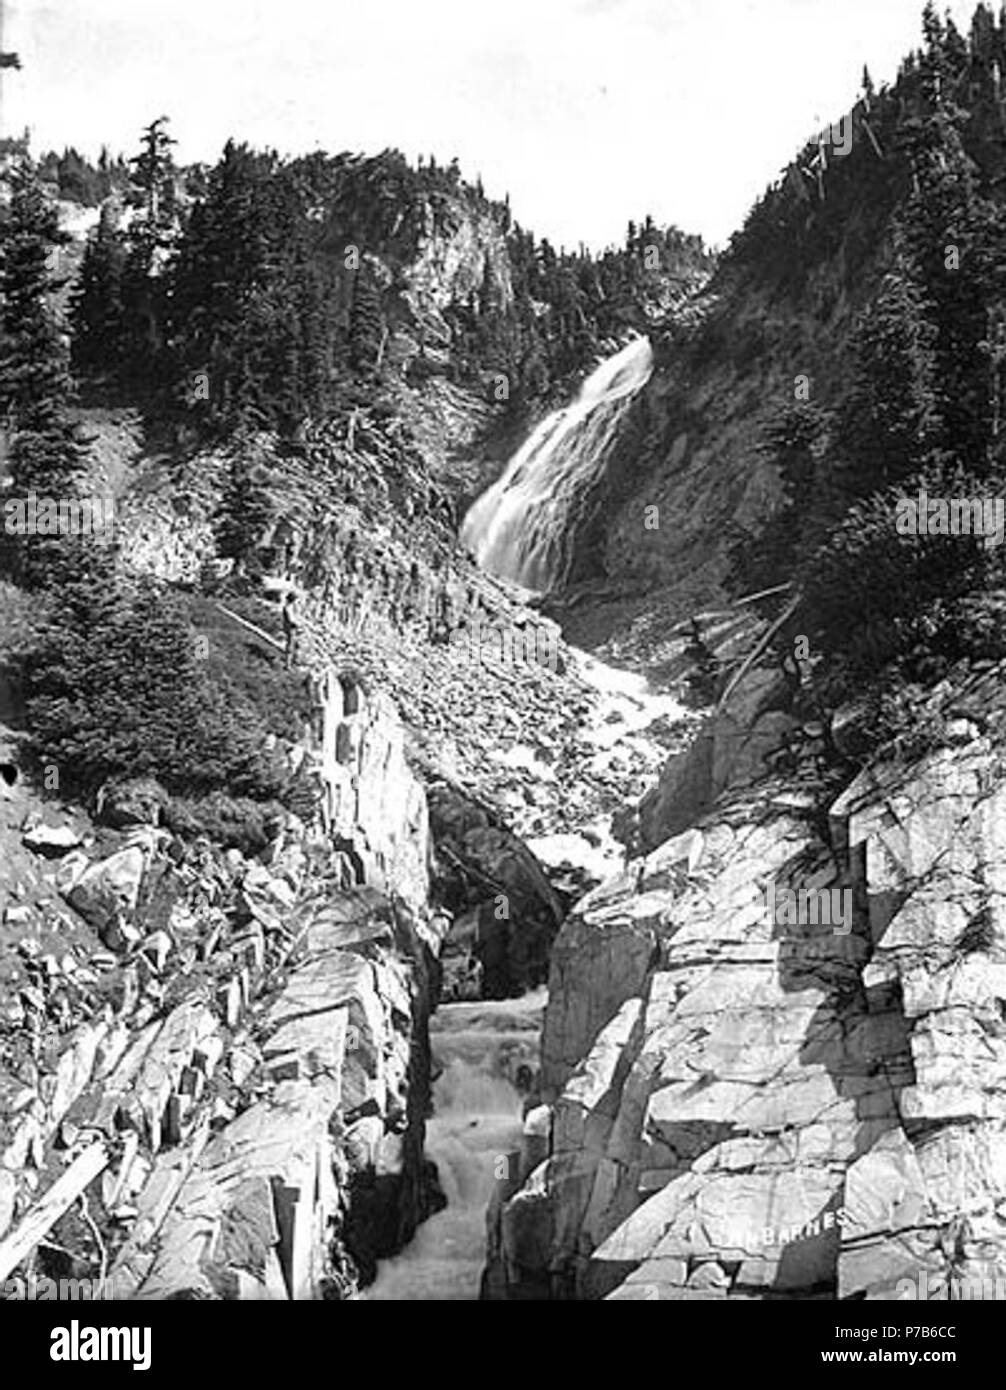 . English: Sluiskin Falls, Mount Rainier National Park, Washington, ca. 1910. English: Man with alpenstock standing to the left of the waterfall . On sleeve of negative: Mt. Tacoma. Paradise. Canyon view of Sluiskin Falls. Subjects (LCTGM): Waterfalls--Washington (State)--Mount Rainier National Park; Canyons--Washington (State)--Mount Rainier National Park Subjects (LCSH): Sluiskin Falls (Wash.); Mount Rainier National Park (Wash.)  . circa 1910 76 Sluiskin Falls, Mount Rainier National Park, Washington, ca 1910 (BAR 235) Stock Photo